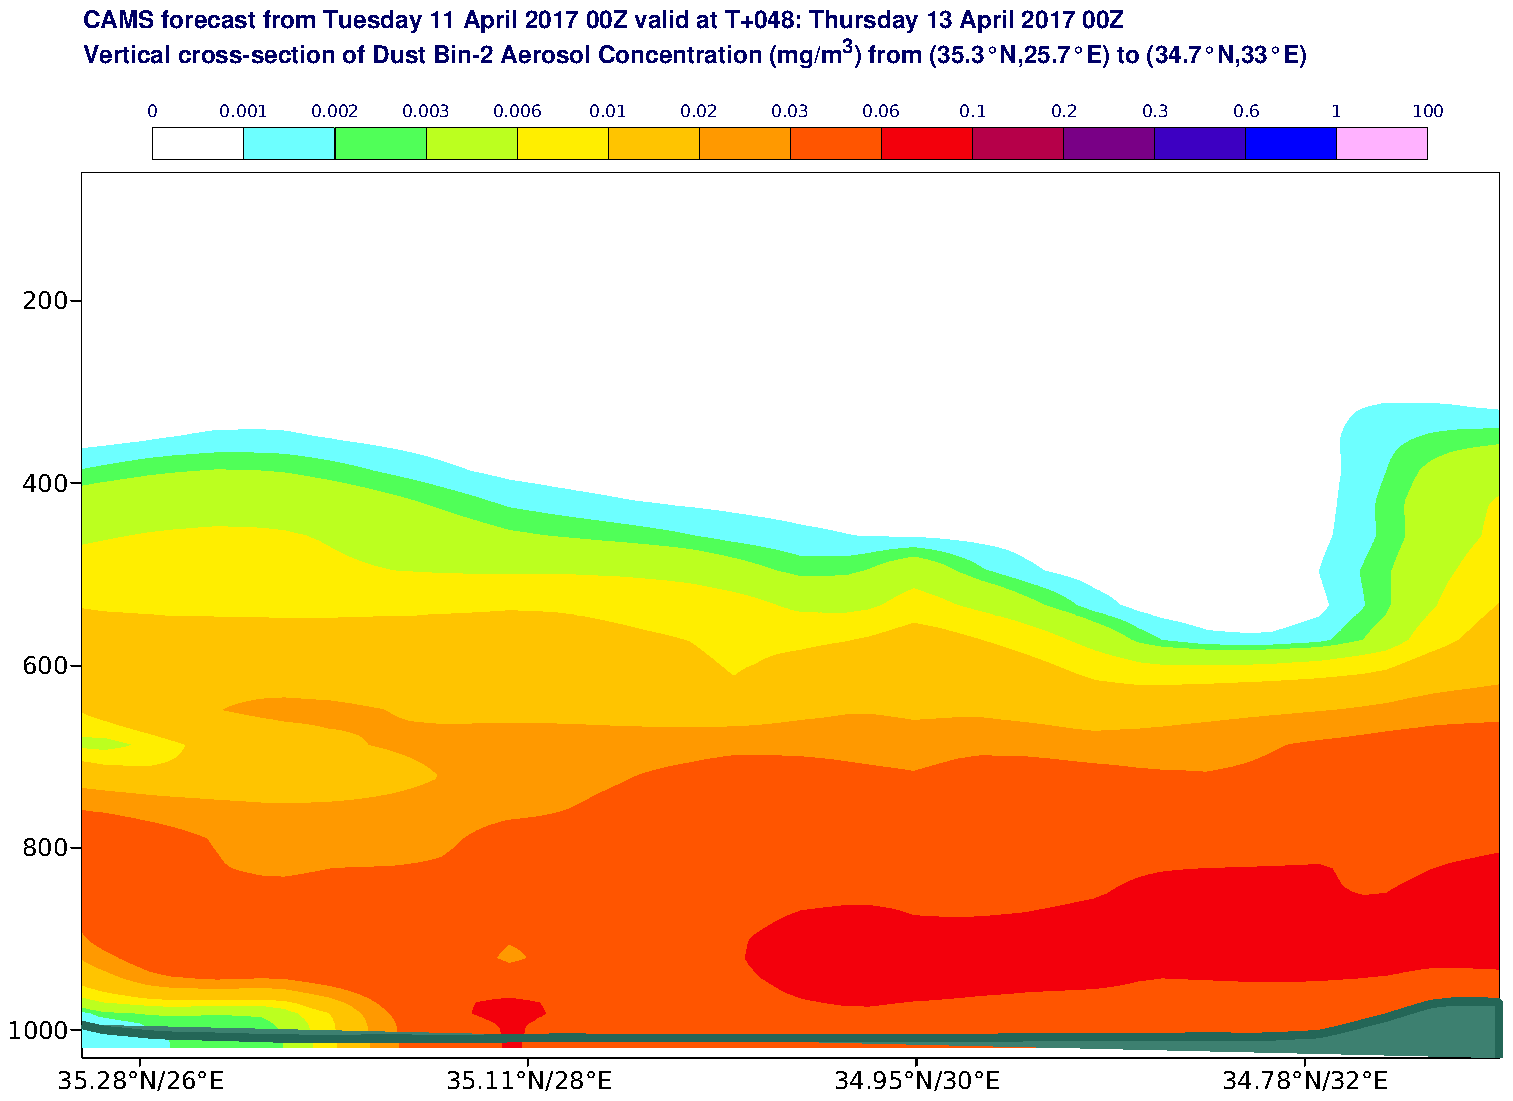 Vertical cross-section of Dust Bin-2 Aerosol Concentration (mg/m3) valid at T48 - 2017-04-13 00:00